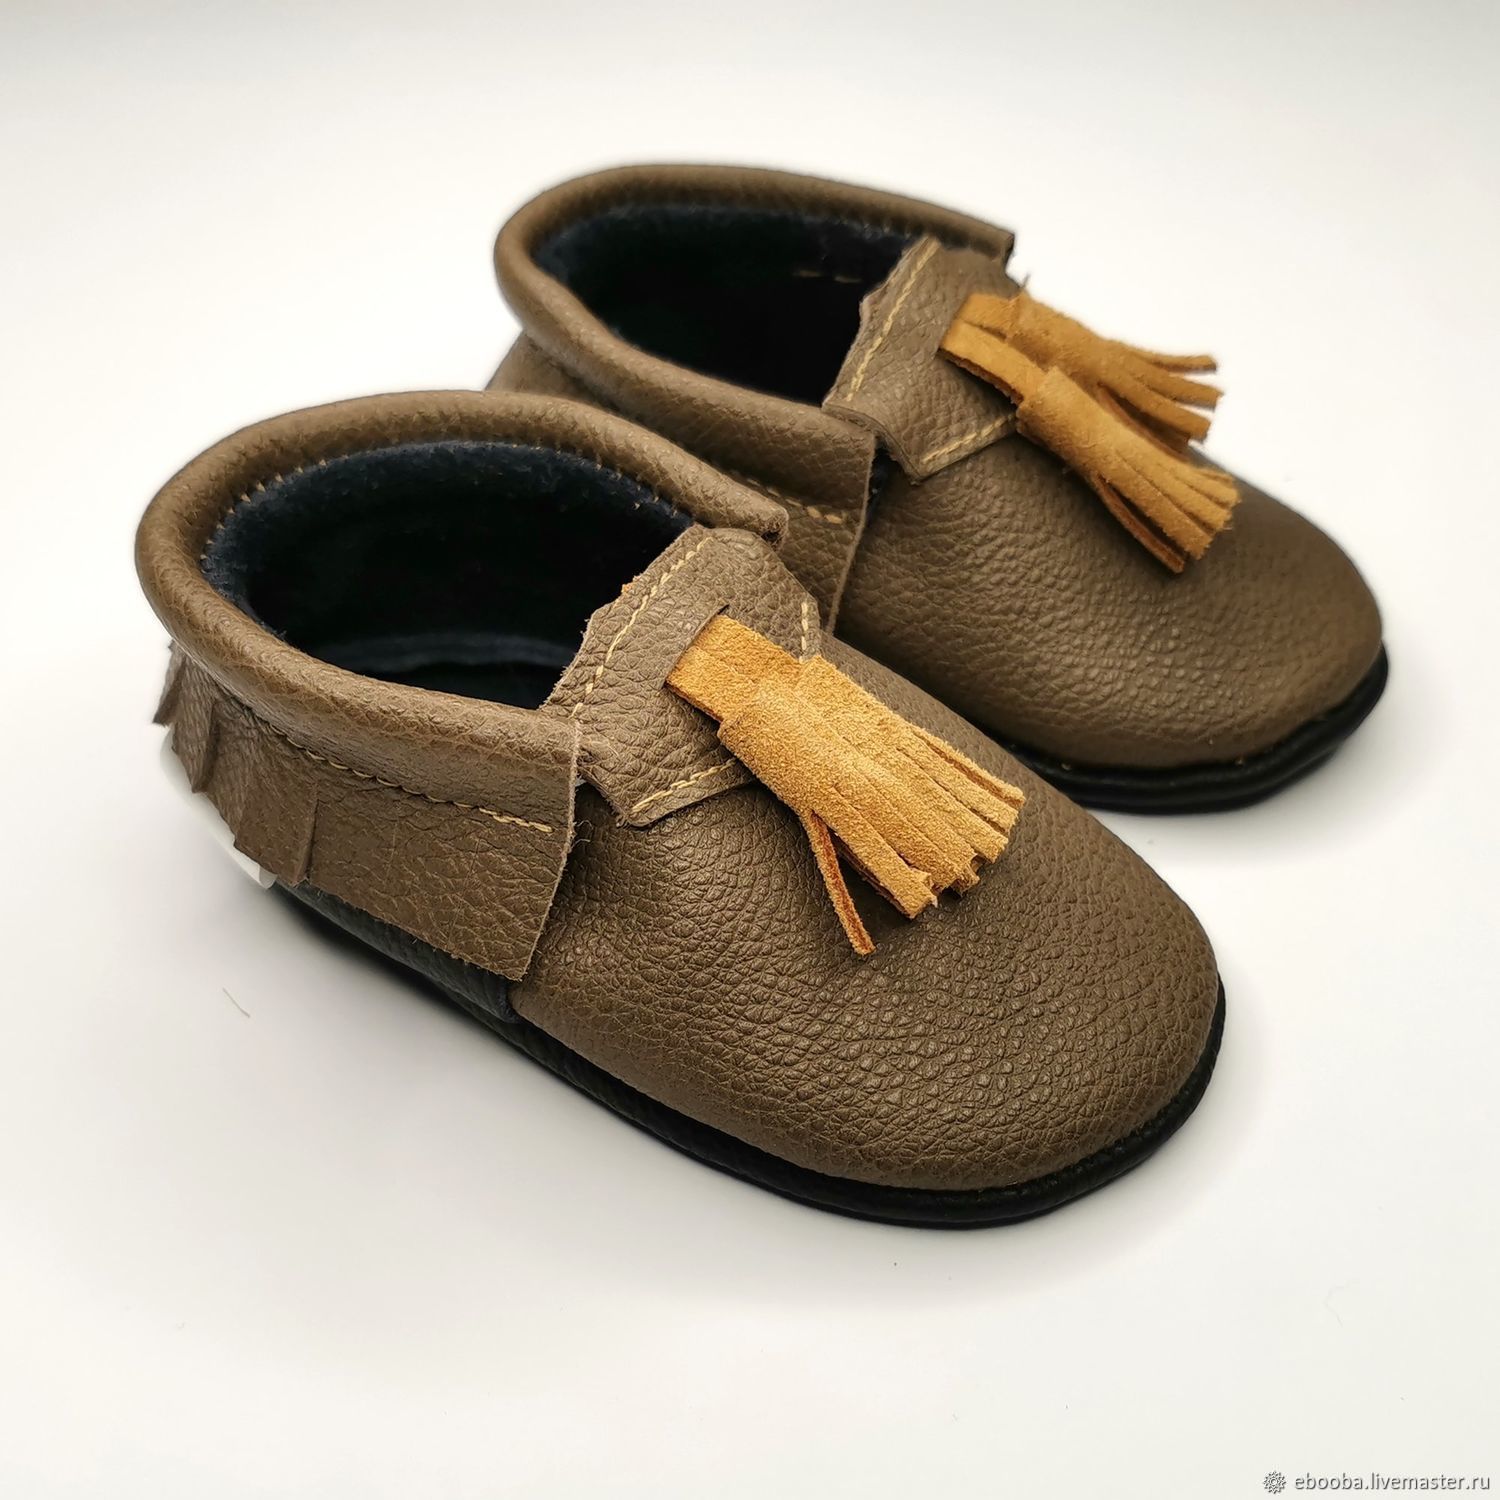 baby moccasin slippers